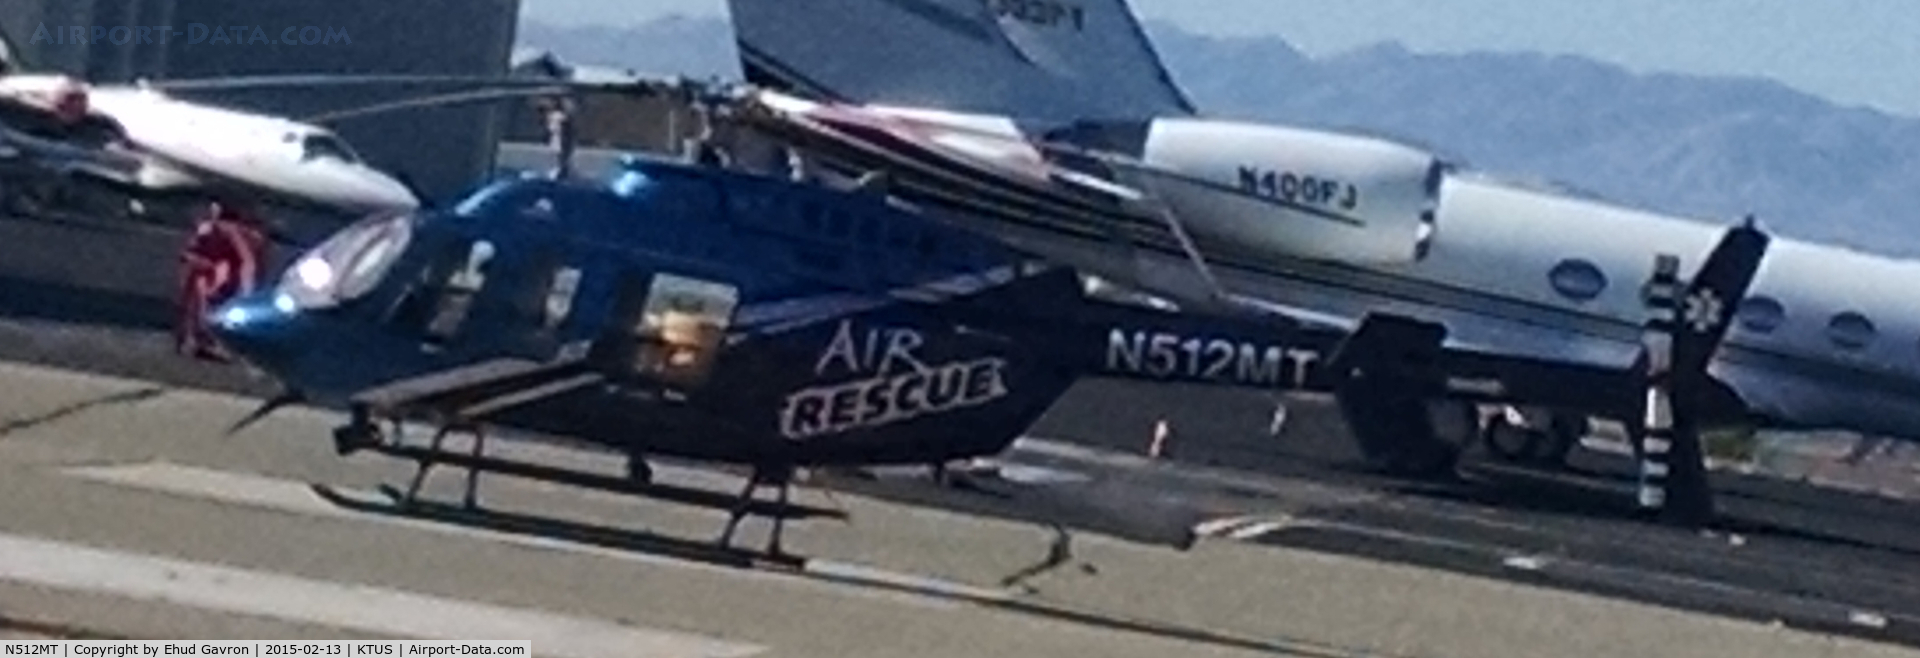 N512MT, 2003 Bell 407 C/N 53571, Med-Trans Corp's N512MT in blue&white Air Rescue livery.